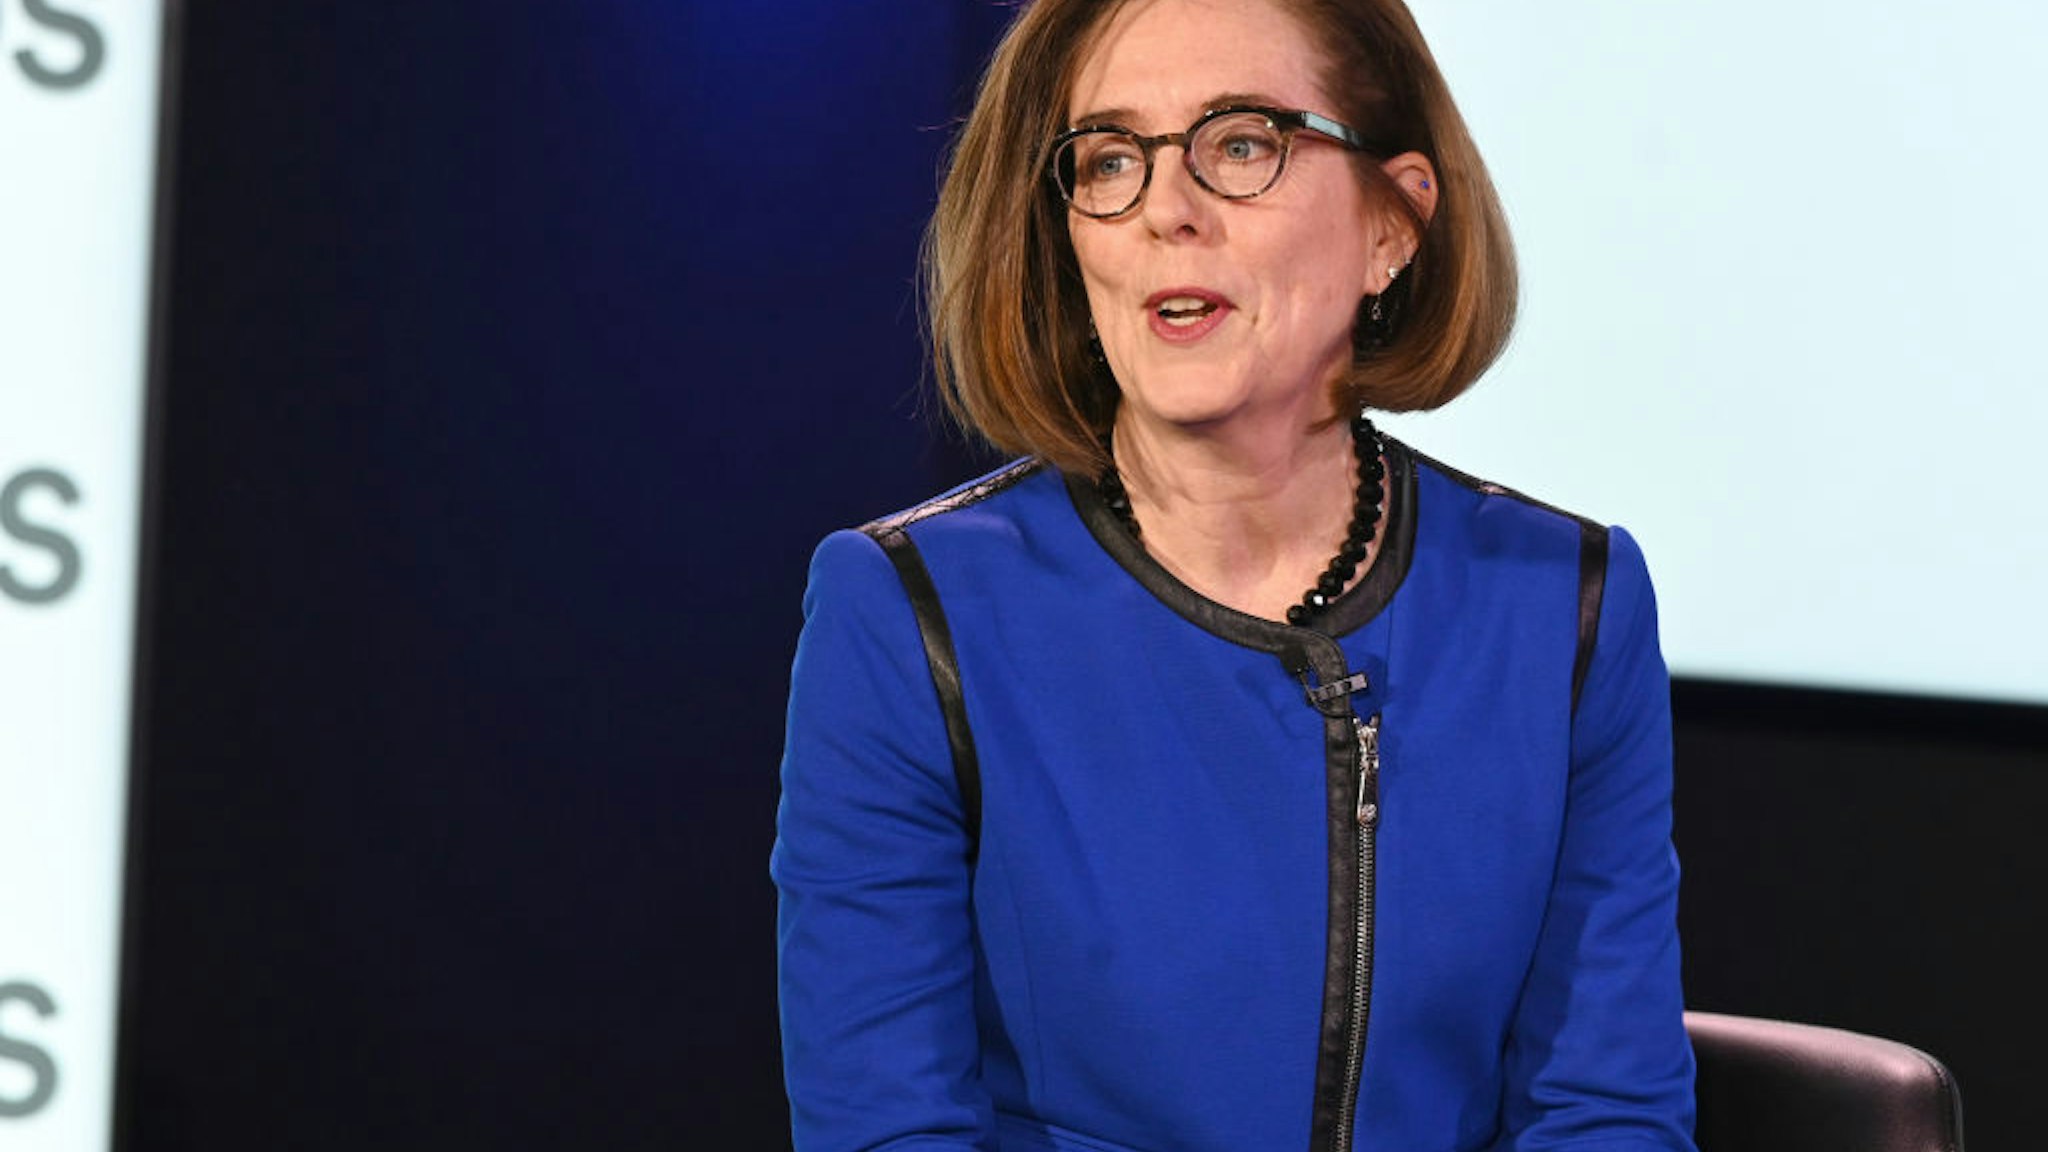 WASHINGTON, DC - FEBRUARY 22: Oregon Governor Kate Brown speaks at the Axios News Shapers event on the U.S. education system on February 22, 2019 in Washington, DC.